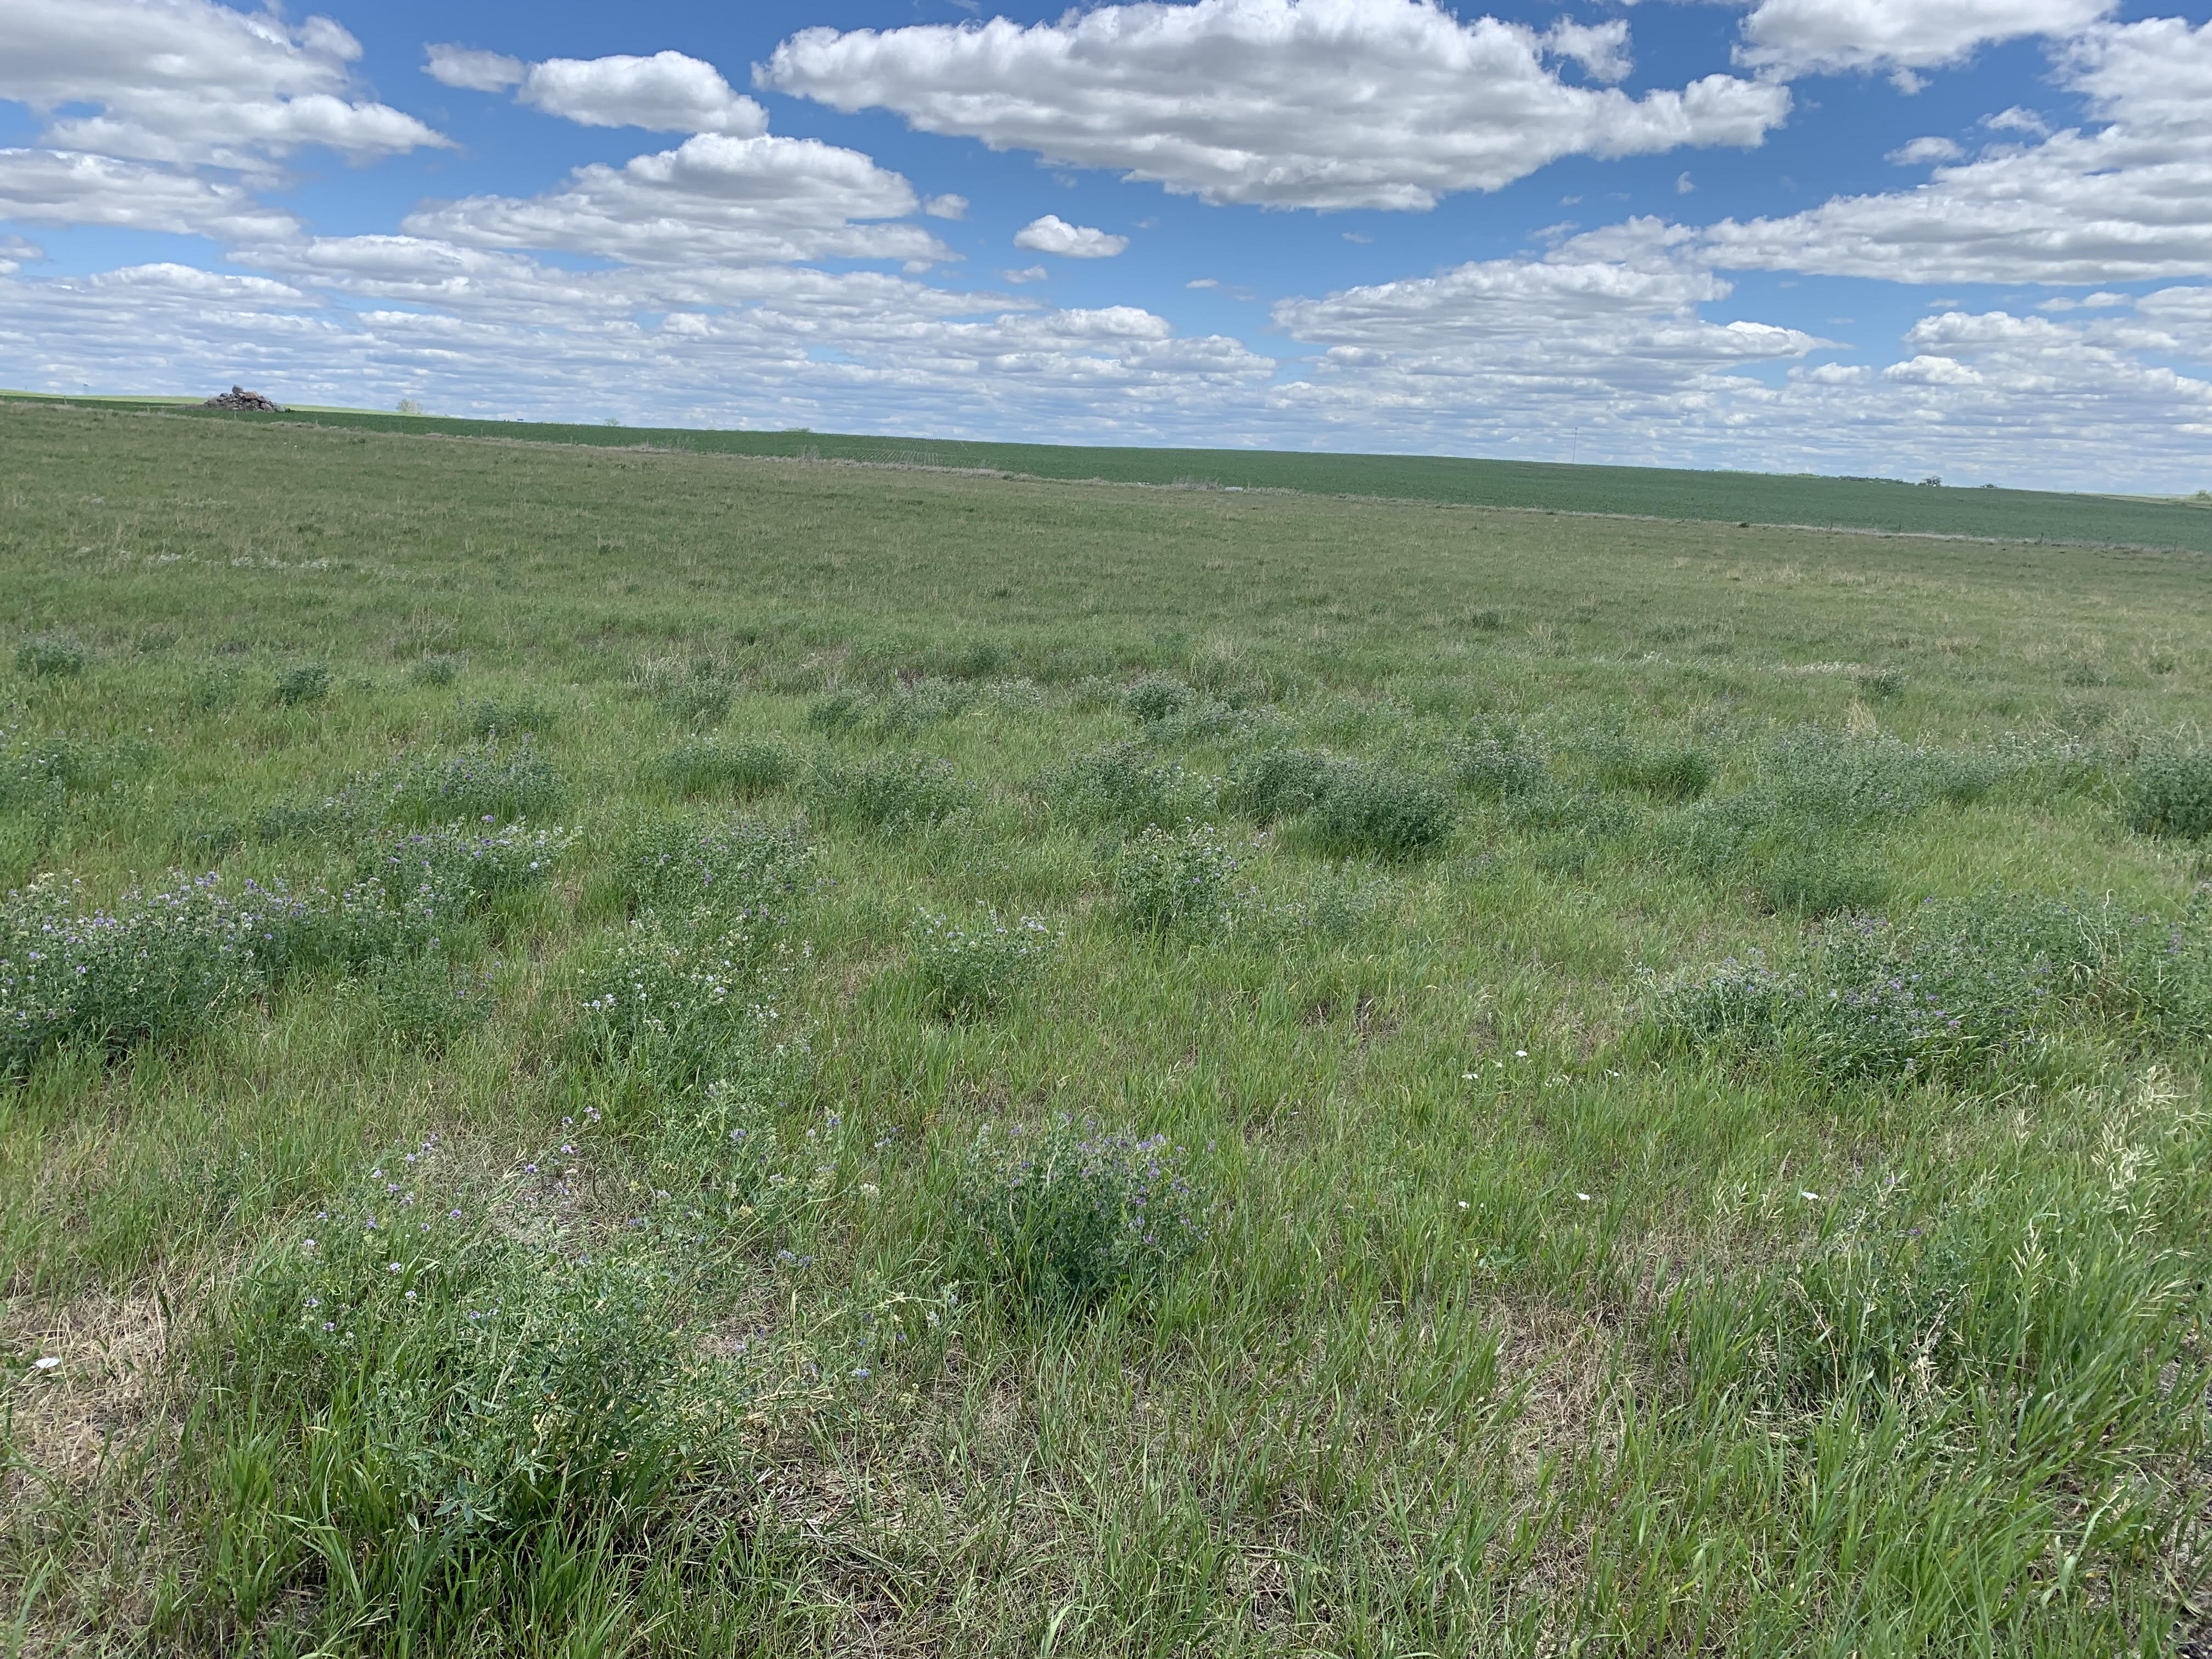 Afternoon Ag News, July 19, 2021: Little hay to be found in central North Dakota